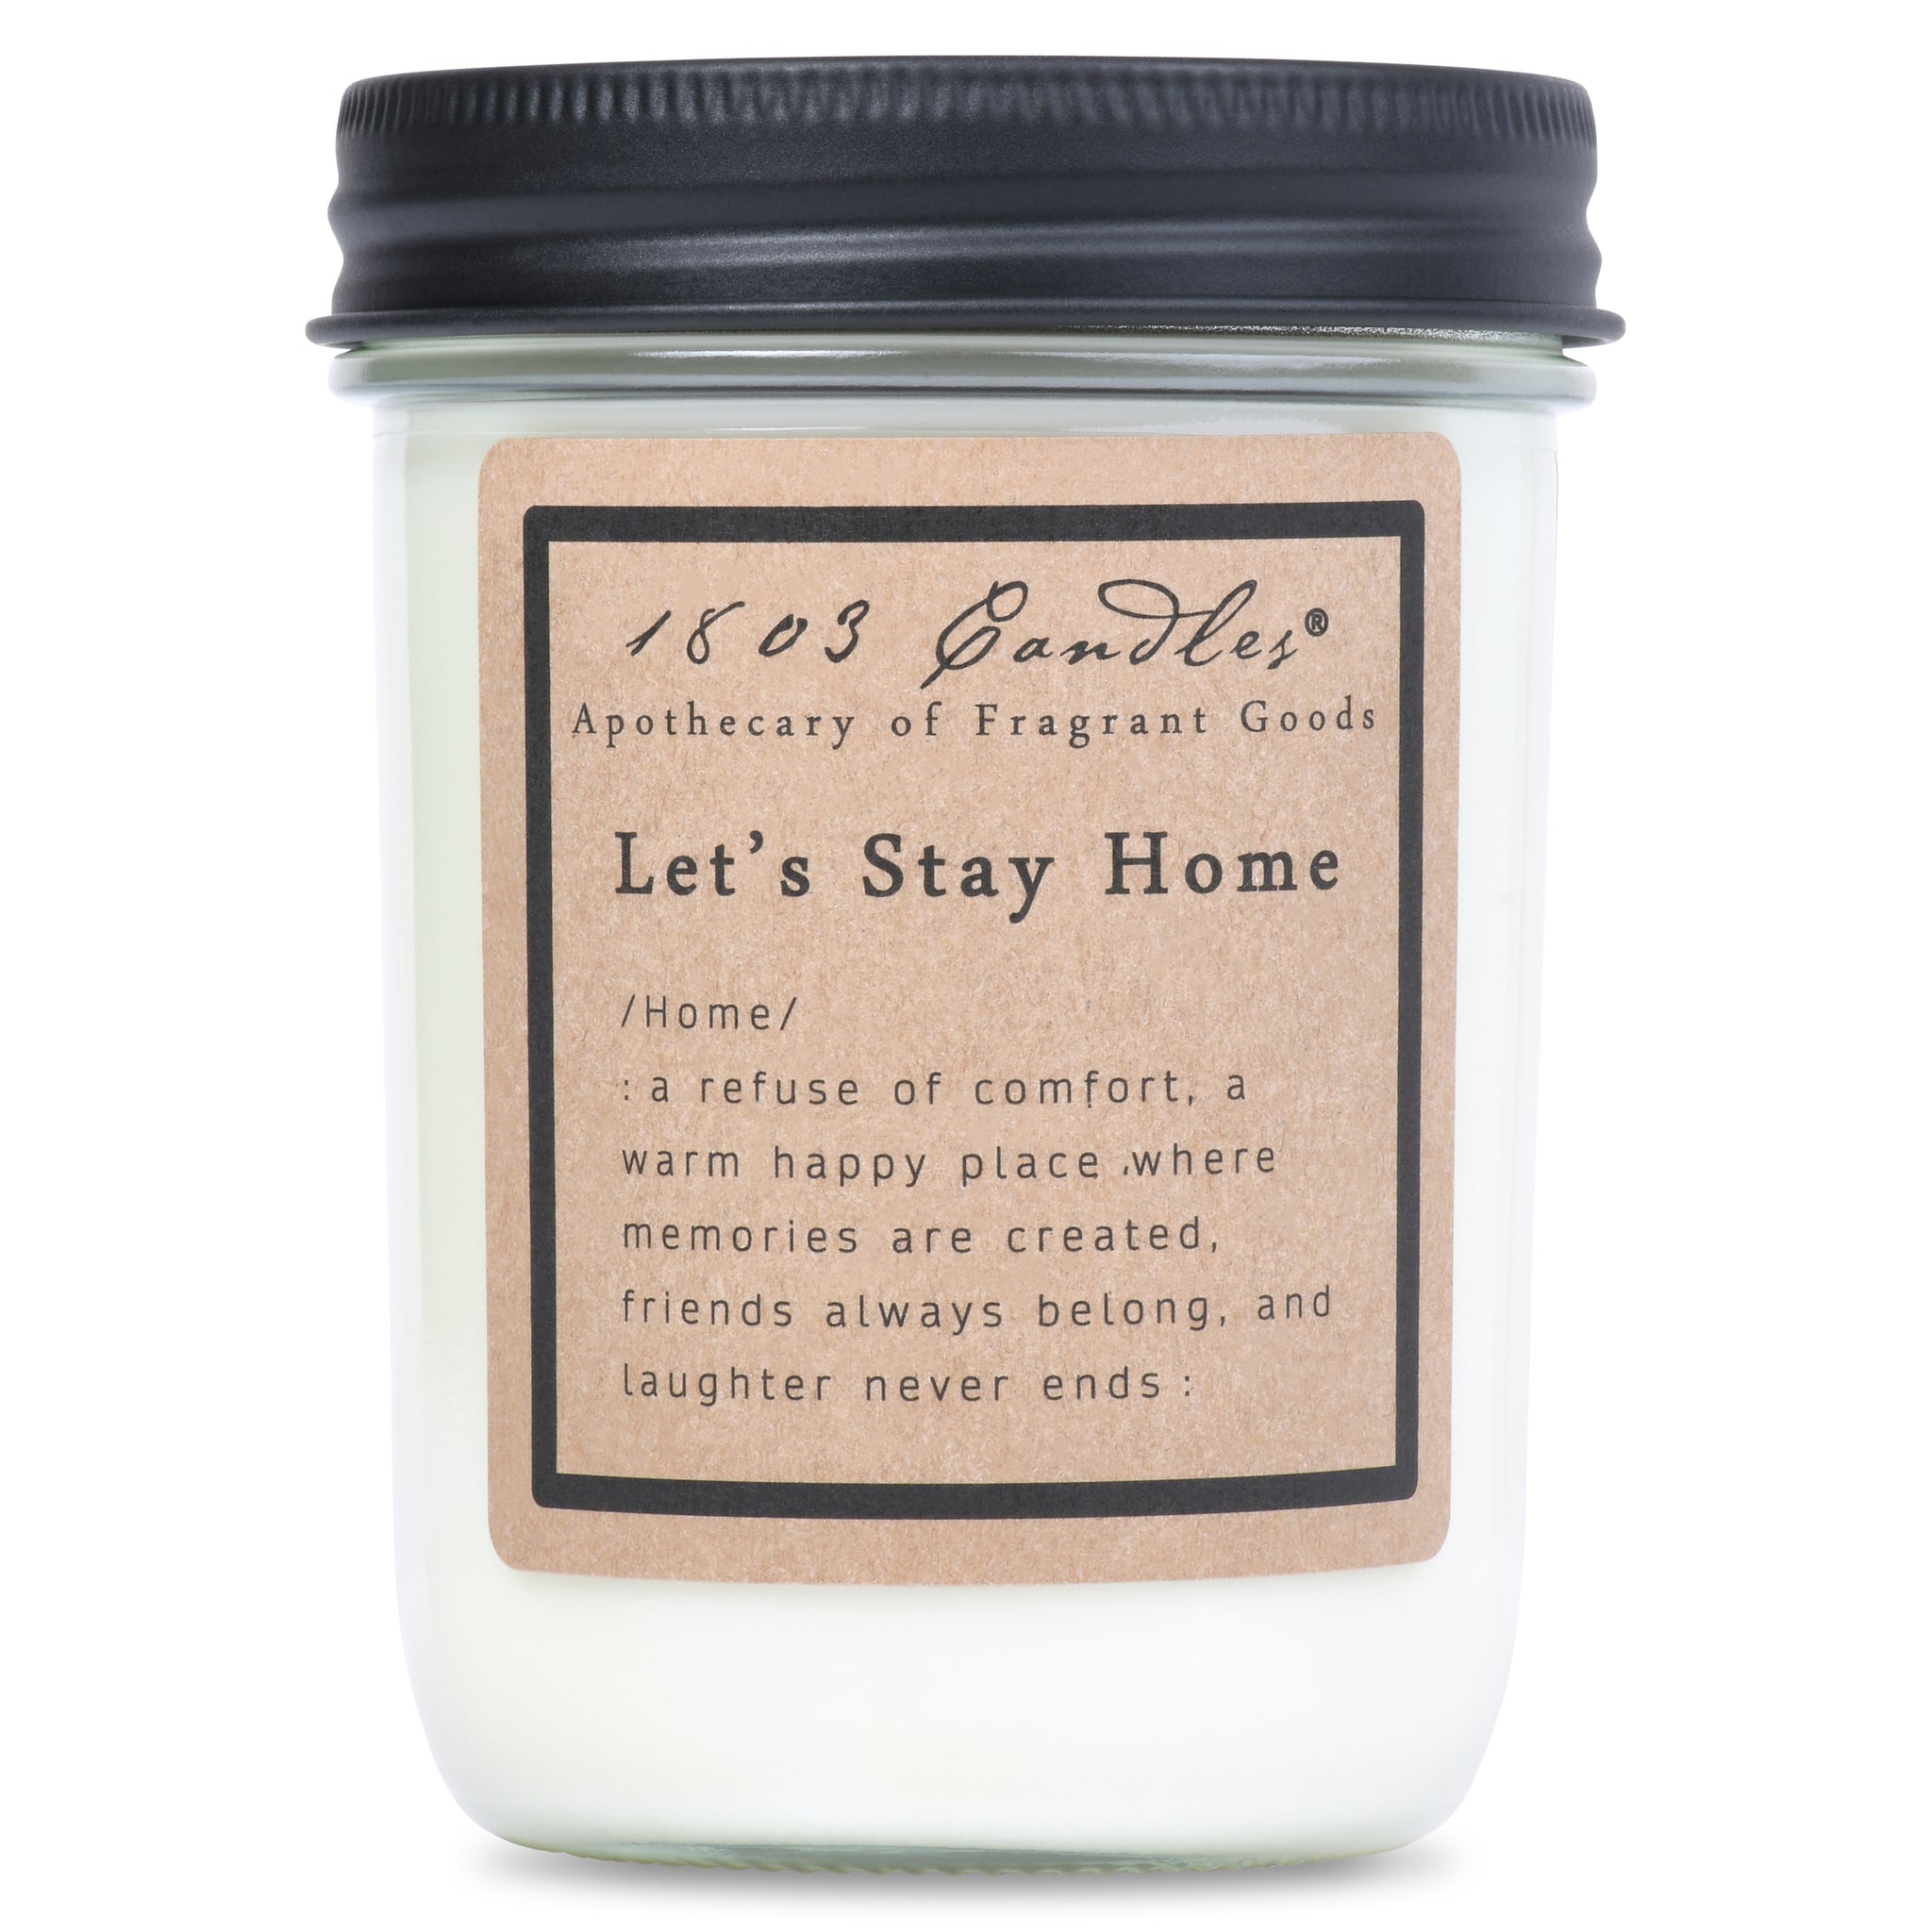 1803 Candle: Let's Stay Home